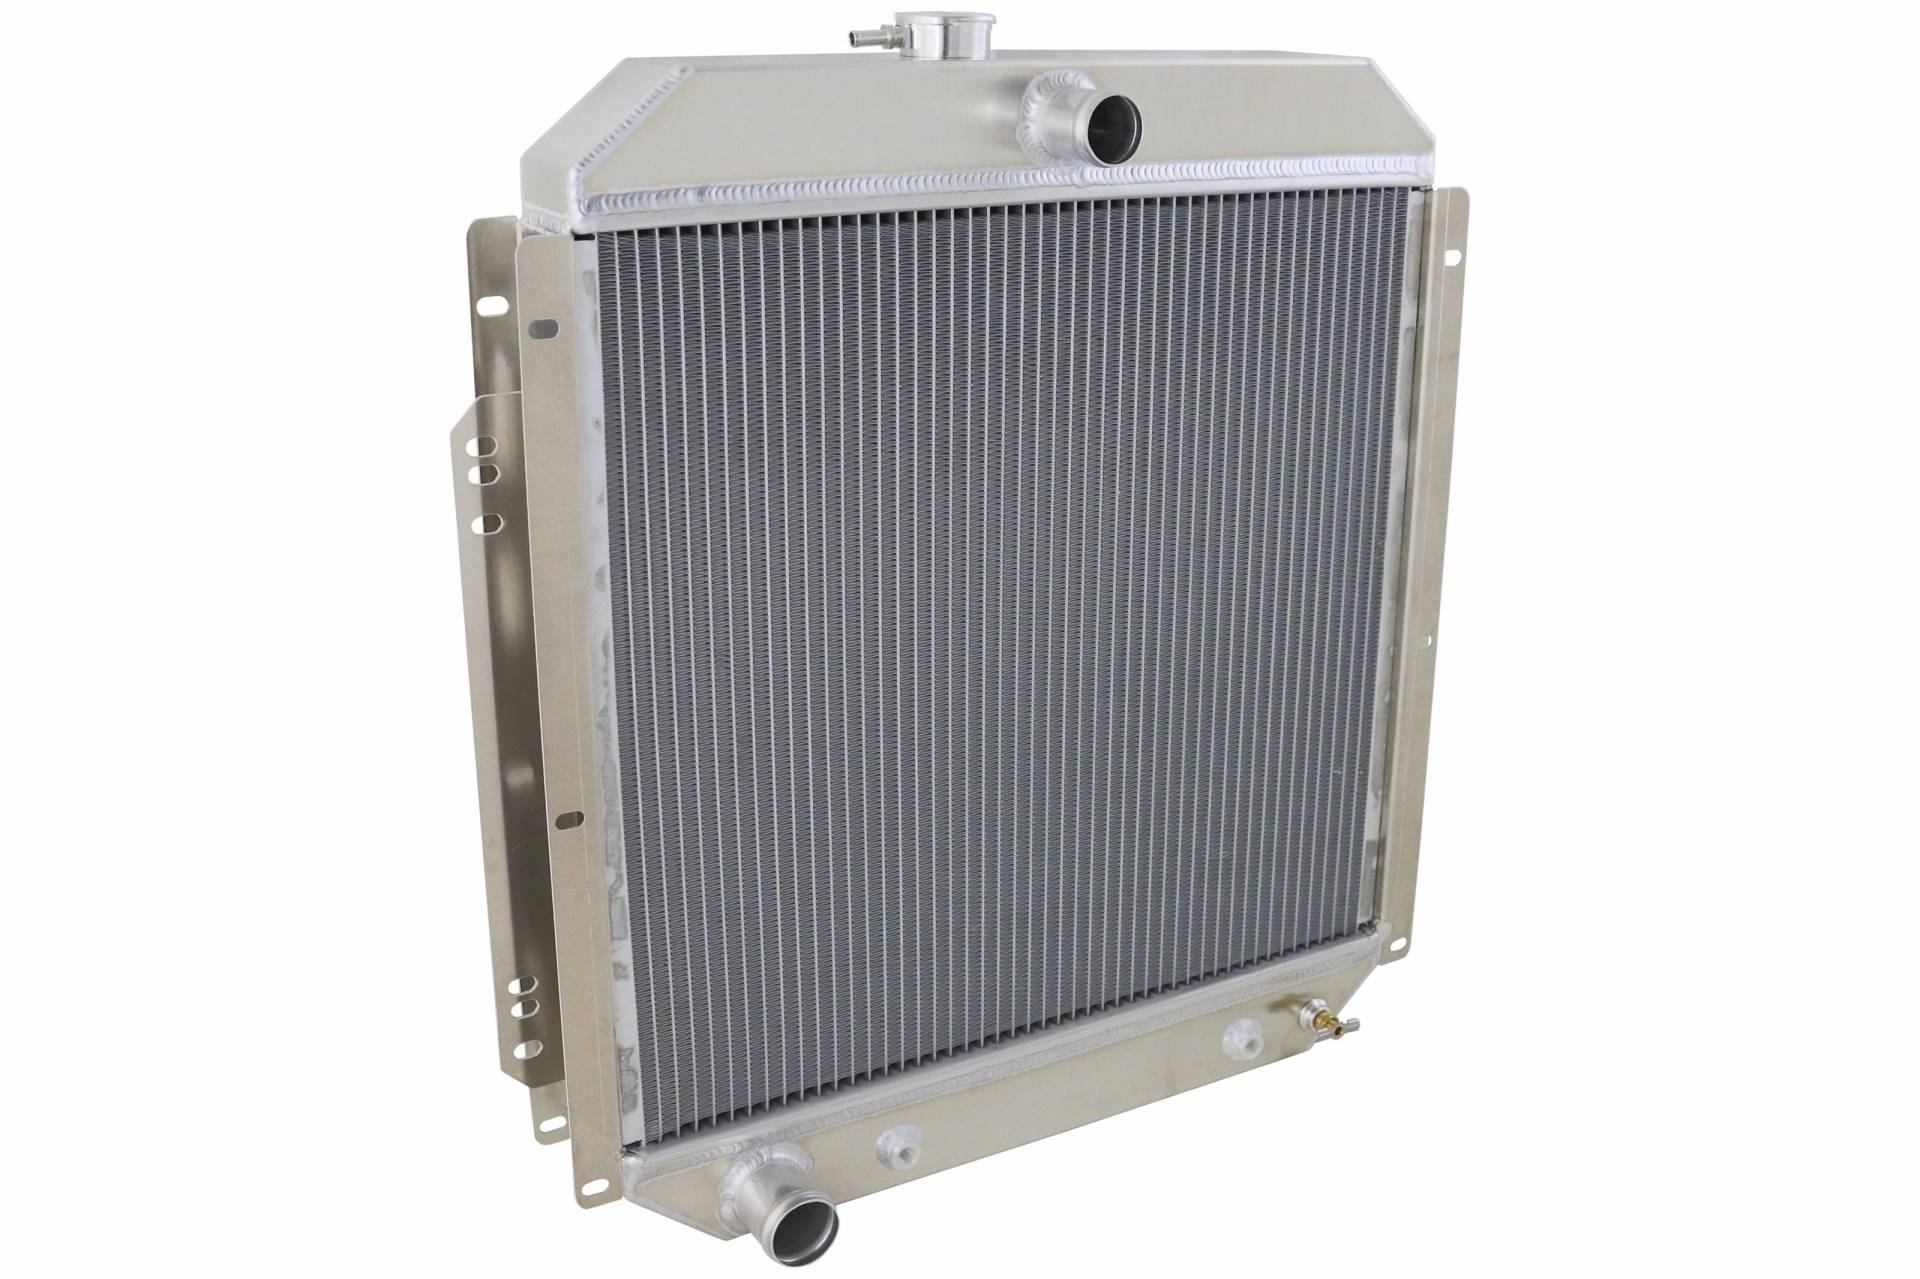 Wizard Cooling Inc - Wizard Cooling - 1953-1956 Ford Trucks Aluminum Radiator - 98502-210